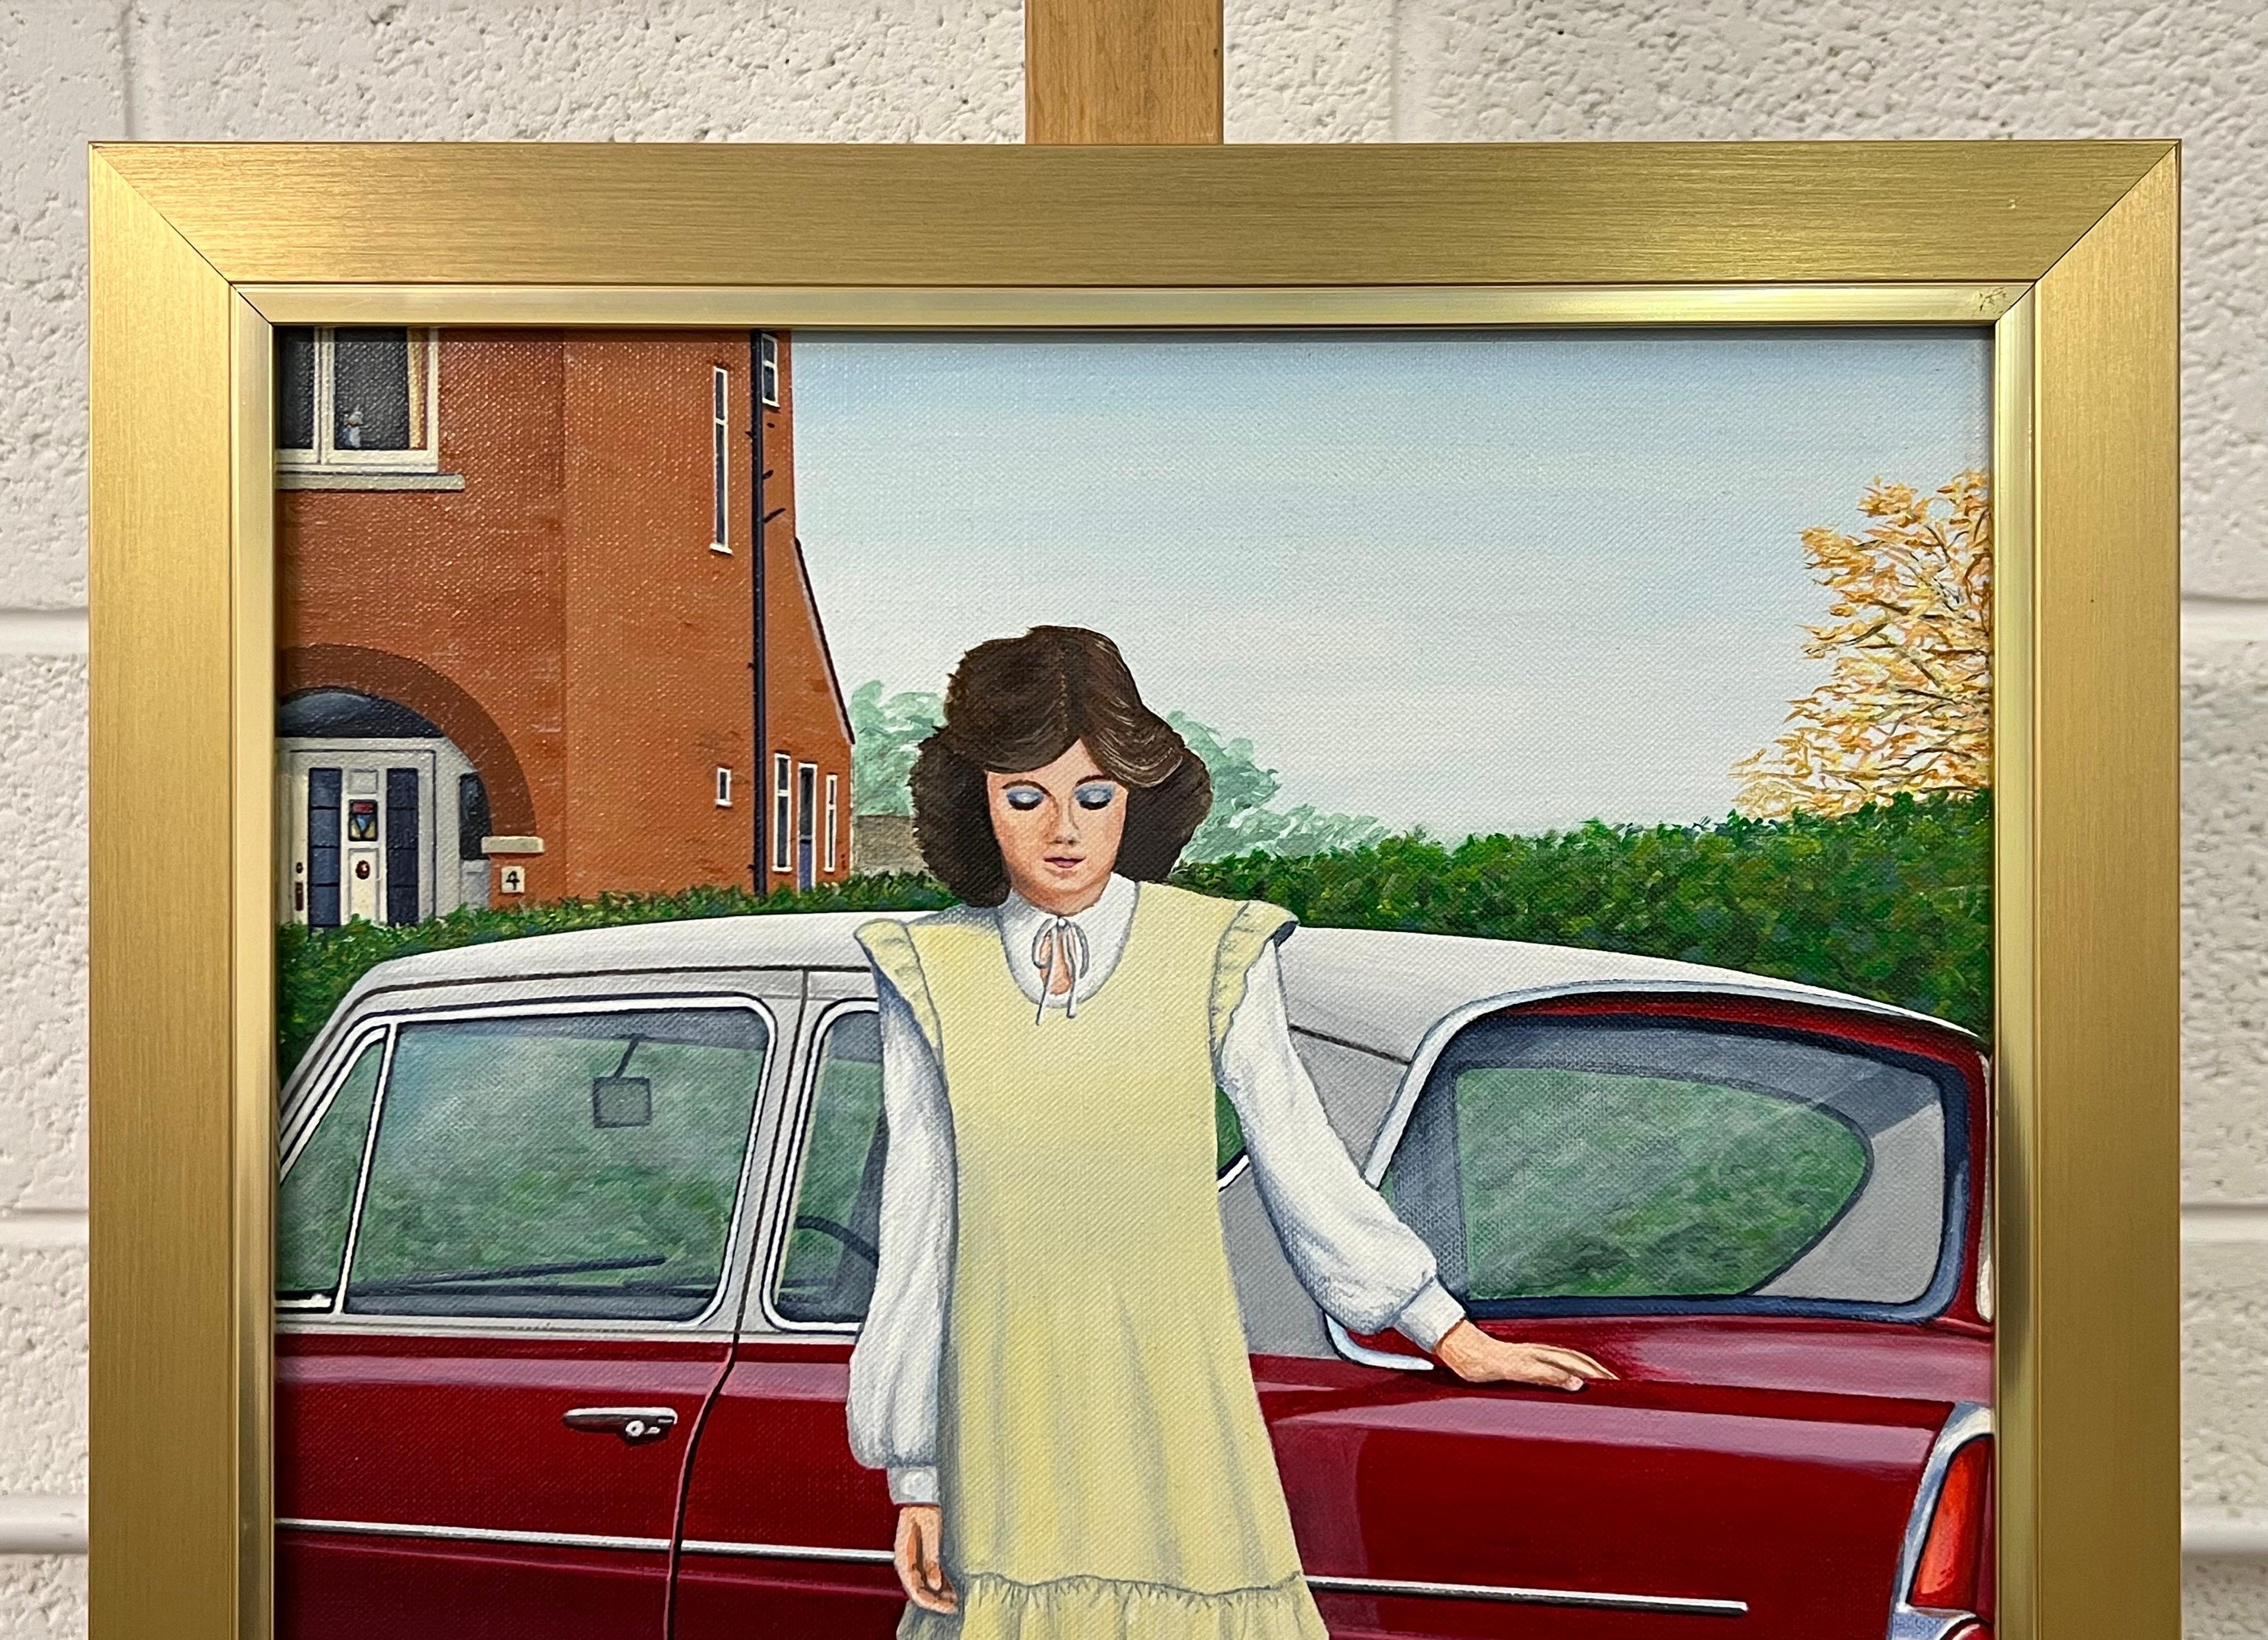 Vintage Englisch Frau in Suburbia mit Classic Ford Auto 1960's 1970's England  im Angebot 1